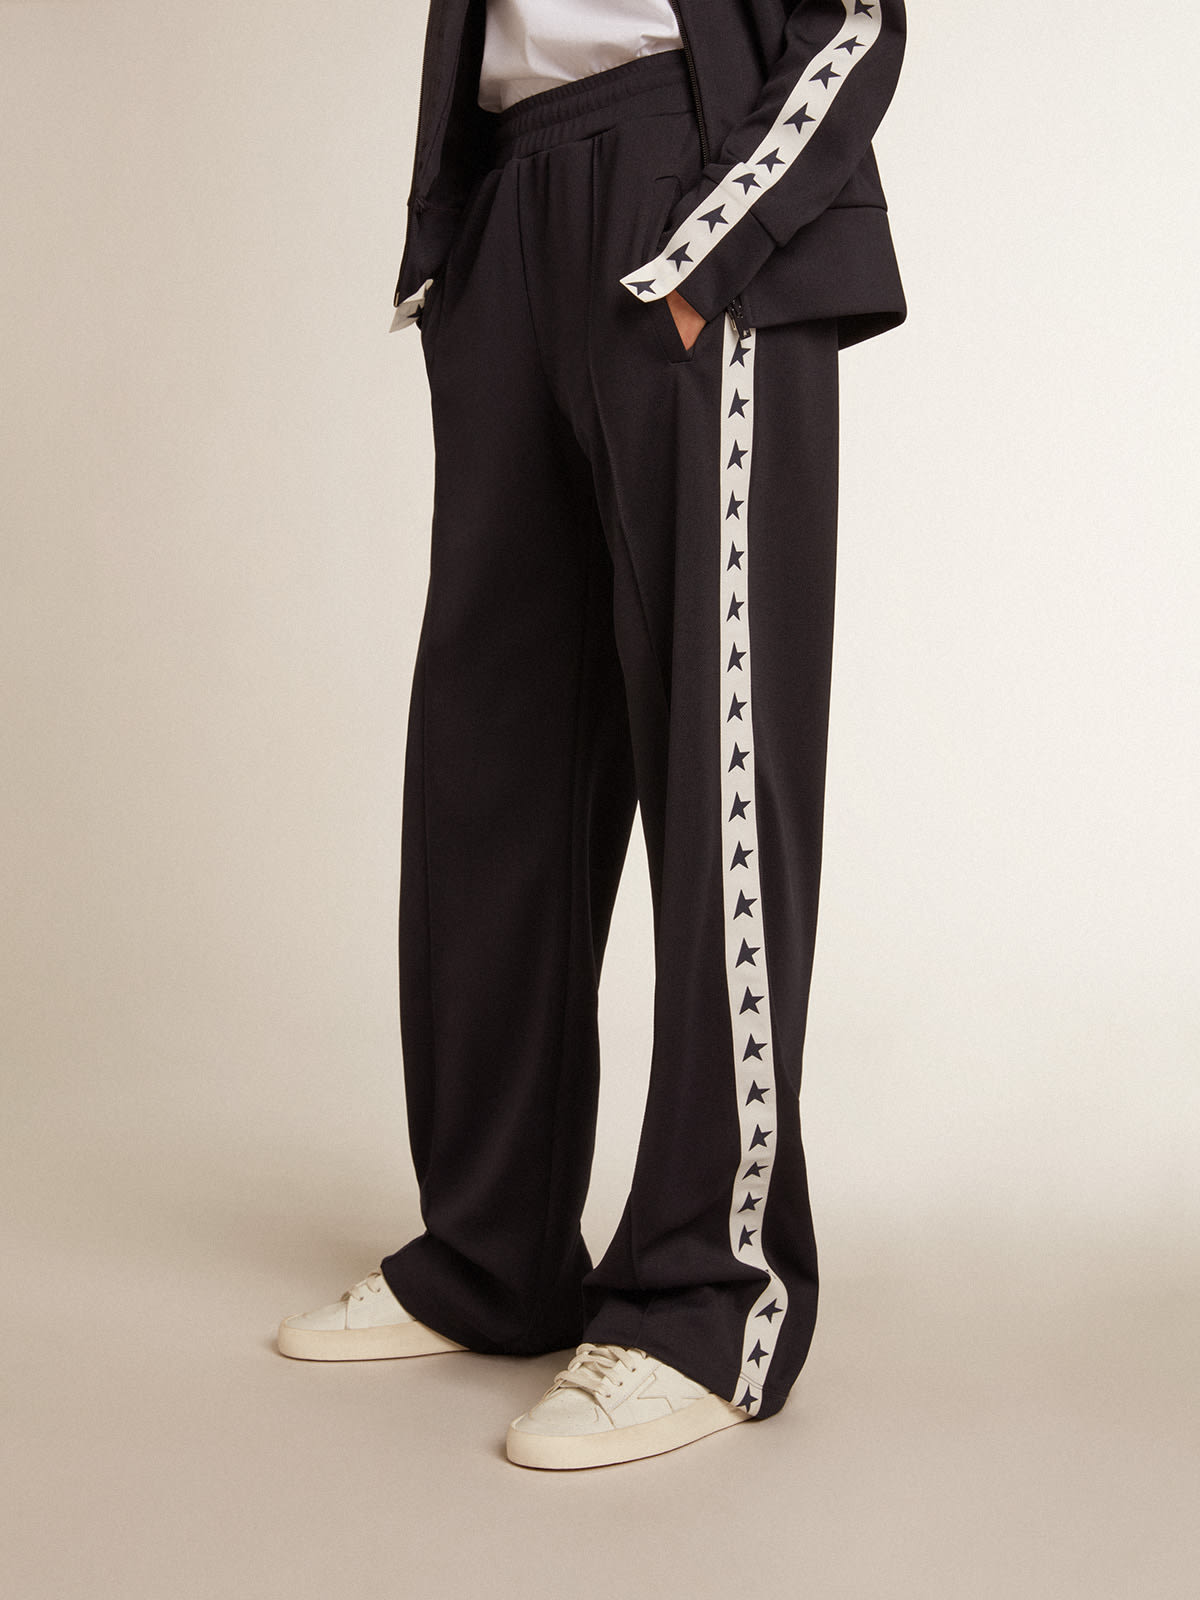 Dark blue joggers with white strip and contrasting stars